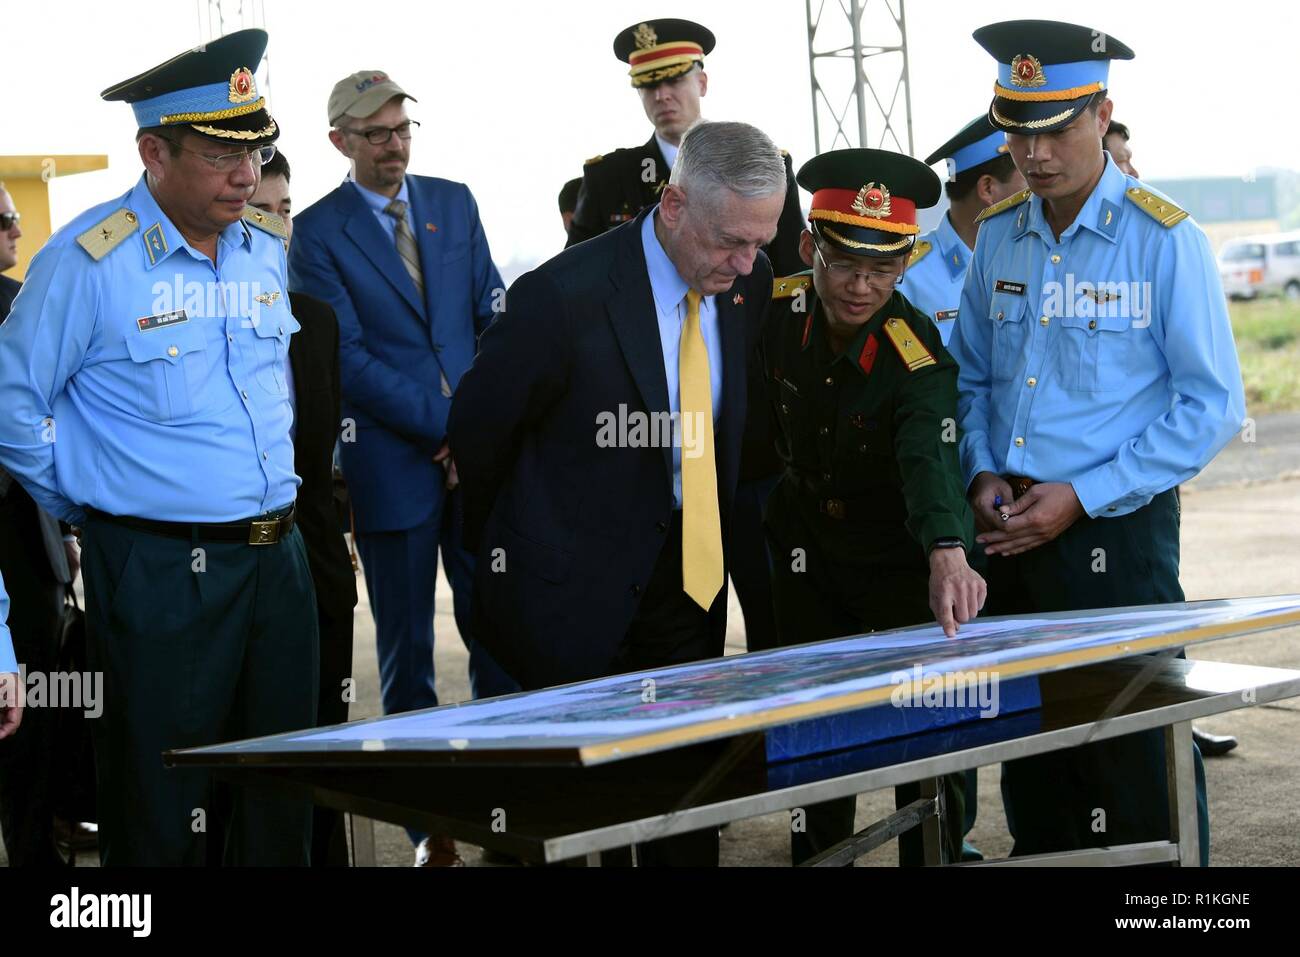 U.S. Secretary of Defense James N. Mattis meets with Vietnamese officials adjacent to a dioxin-contaminated site at Bien Hoa Air Base outside Ho Chi Minh City, Vietnam, Oct. 17, 2018. Stock Photo